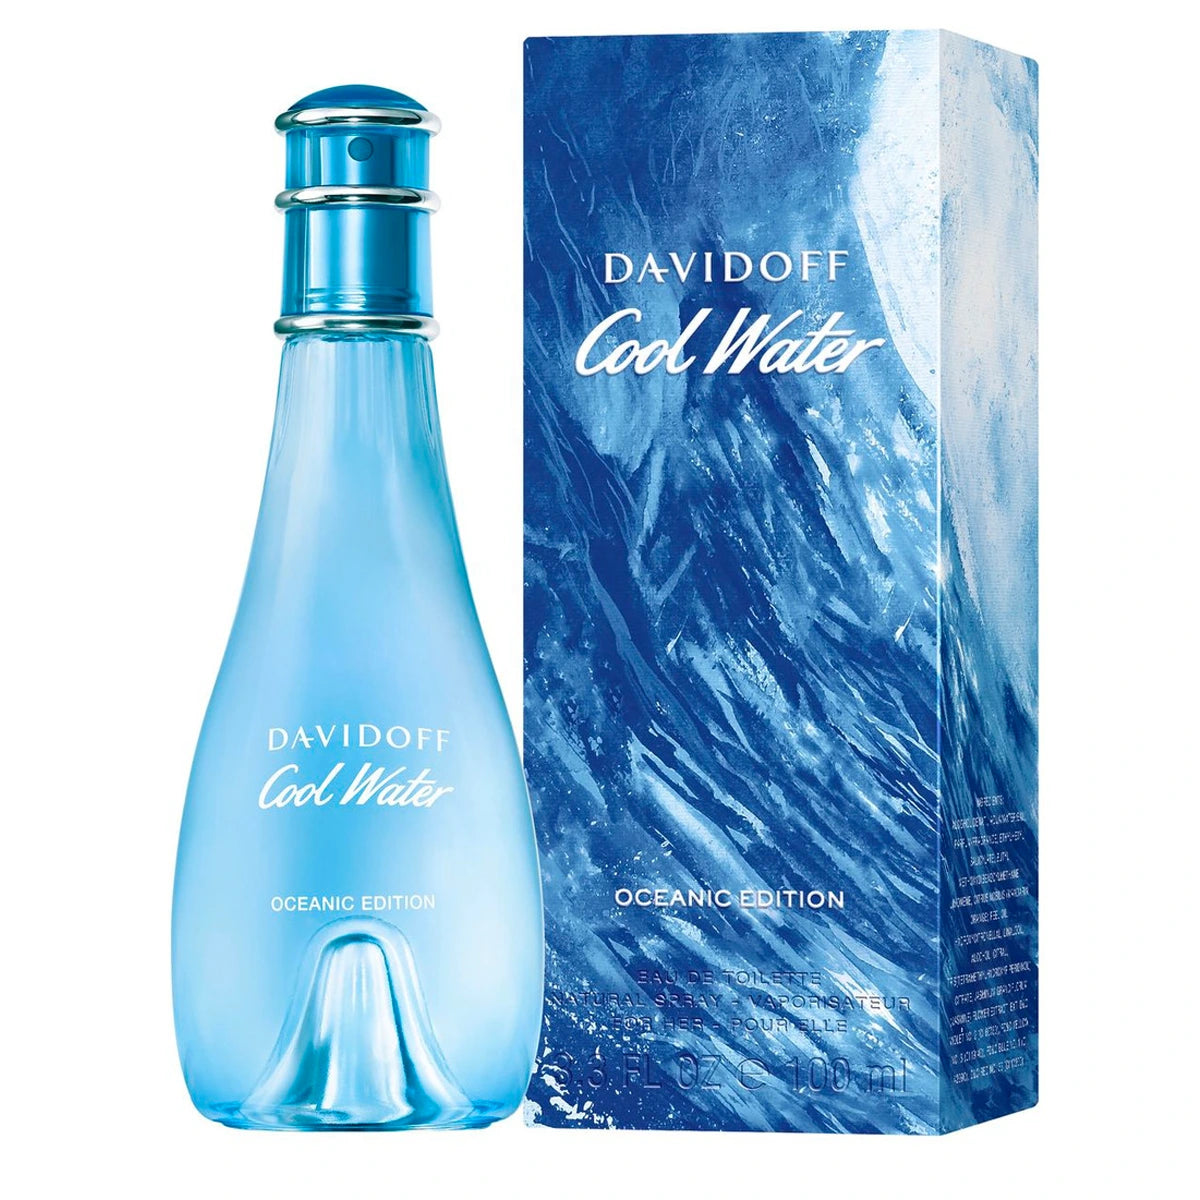 <p data-mce-fragment="1">Introduced in 2023. Discover a fresh, floral aquatic scent with Cool Water Oceanic Edition EDT for women. Sophisticated and exclusive, this new fragrance from Davidoff will take you on a luxurious journey, beginning with notes of Water and Rose, and finishing on a base of Driftwood. Surround yourself with the timeless elegance of this sophisticated scent.</p>